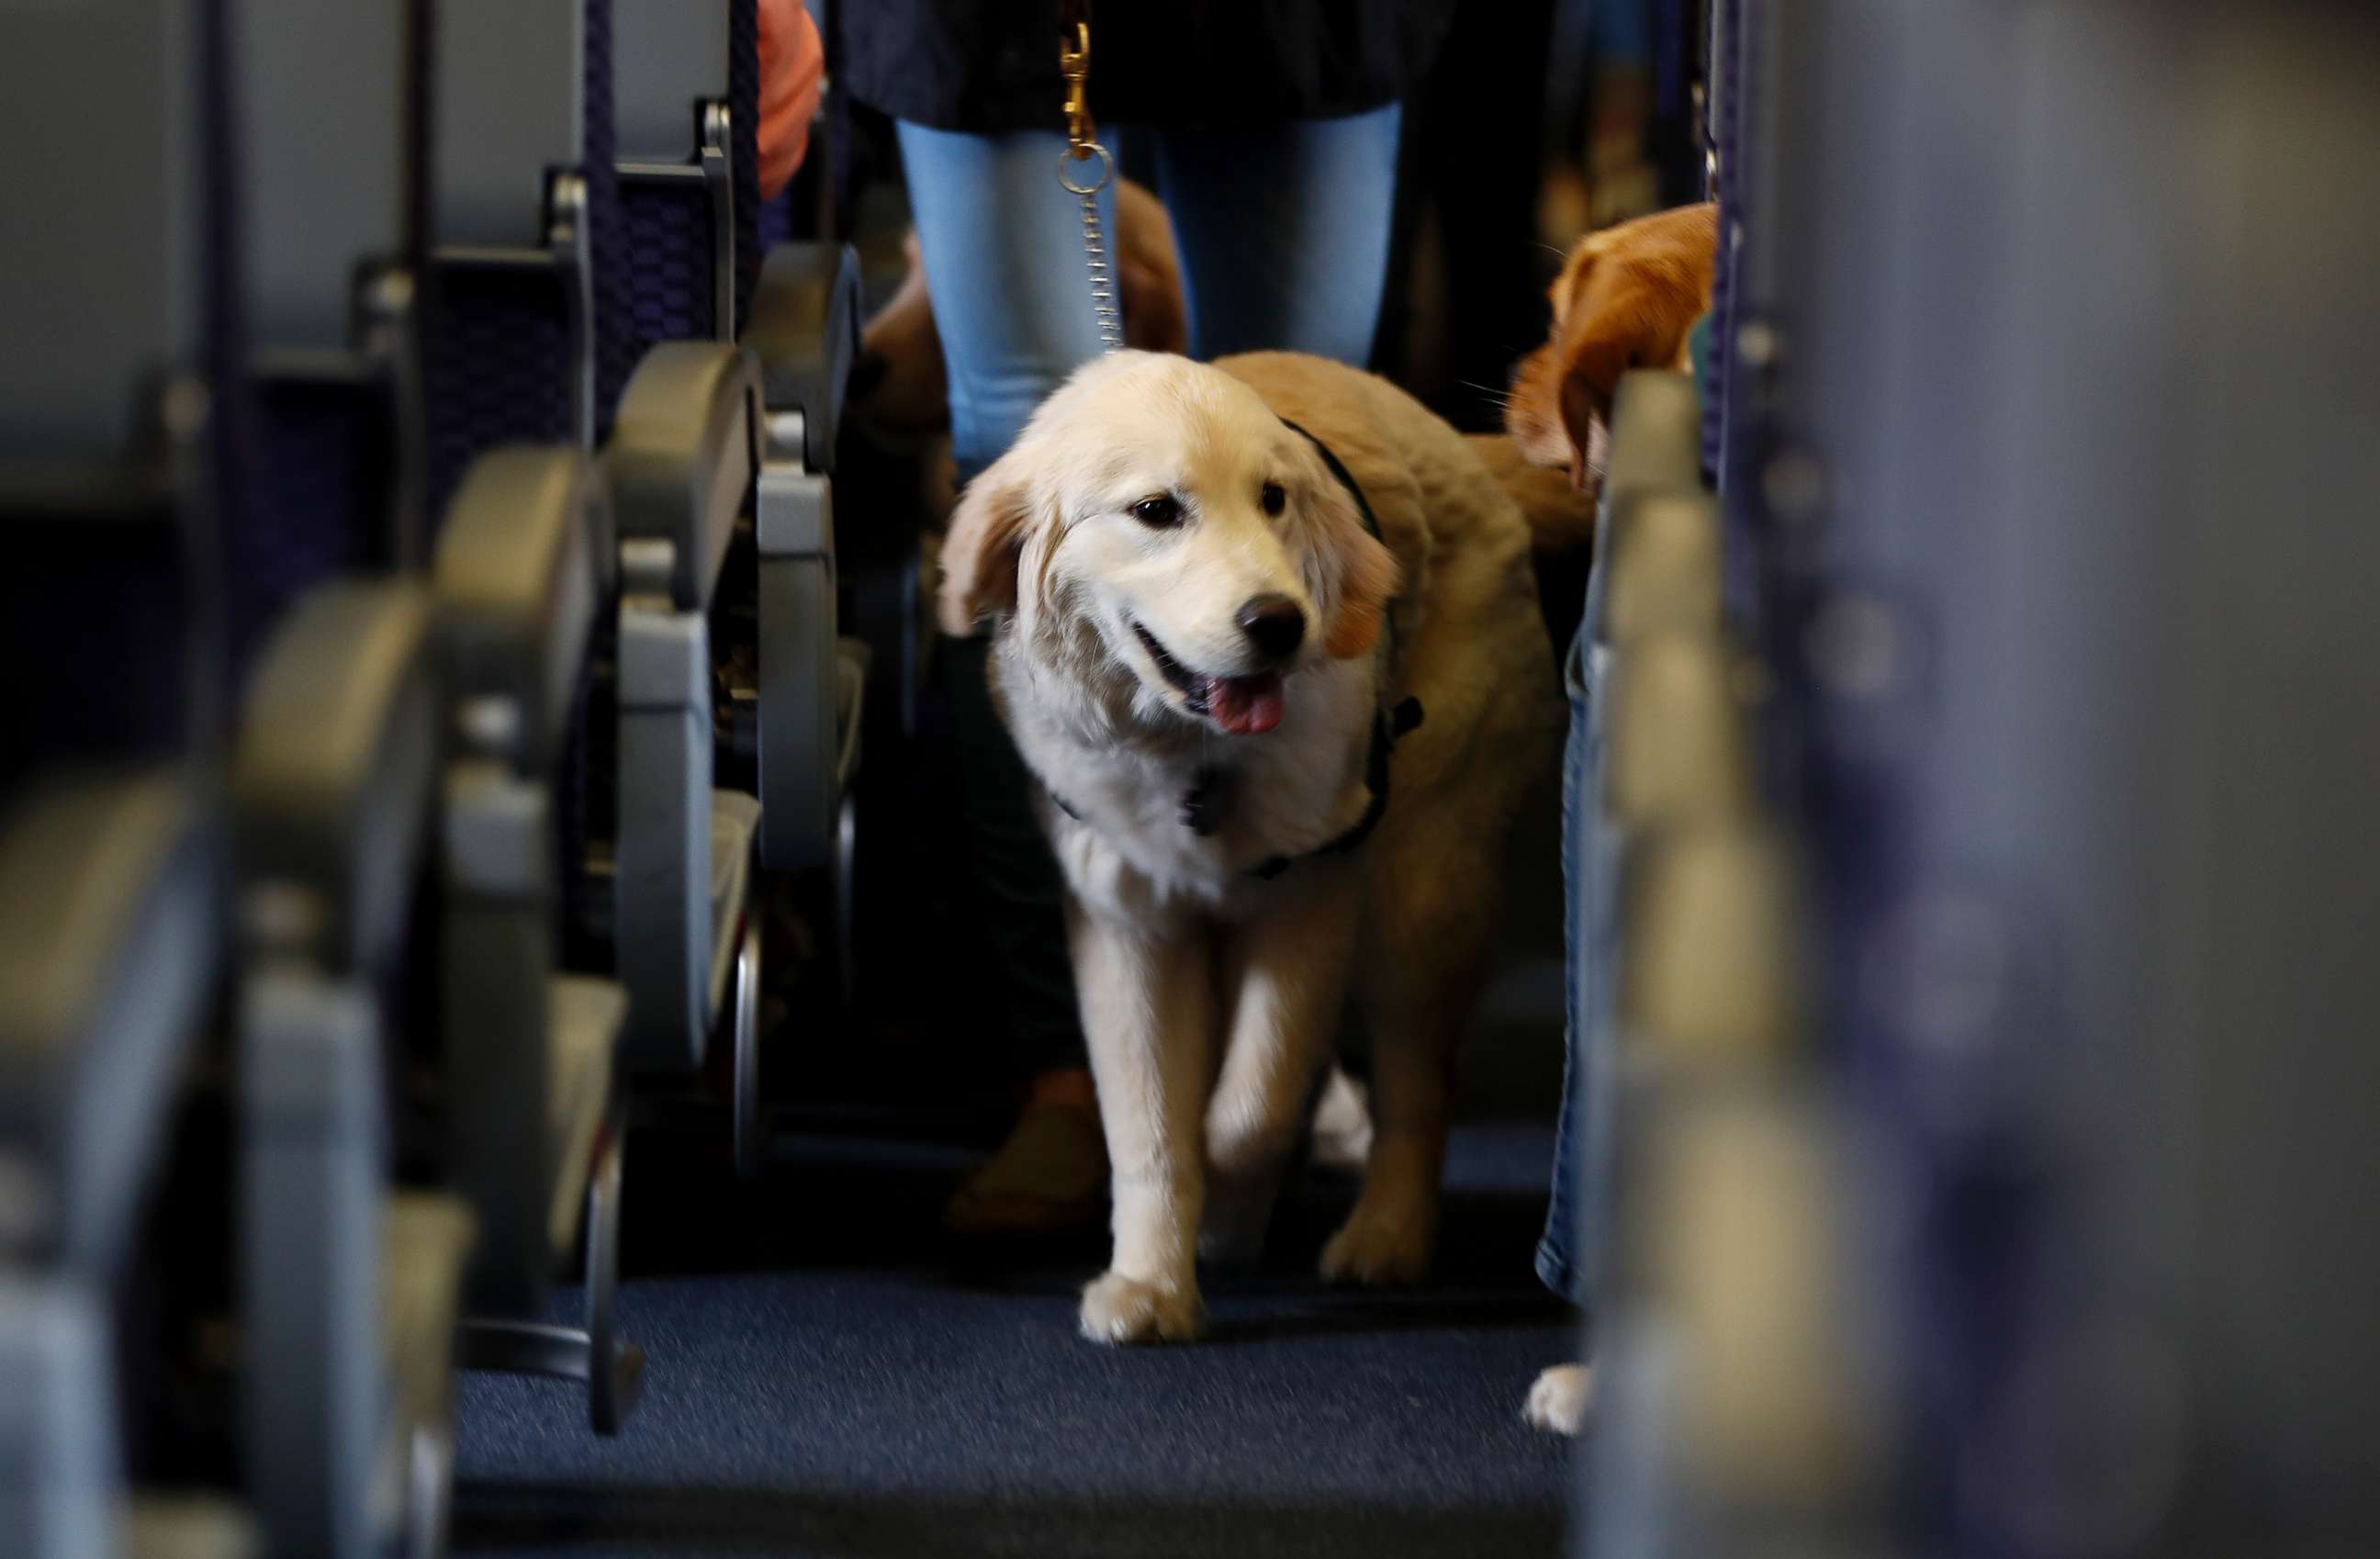 PHOTO: In this April 1, 2017, file photo, a service dog strolls through the aisle inside a United Airlines plane at Newark Liberty International Airport in Newark, N.J.